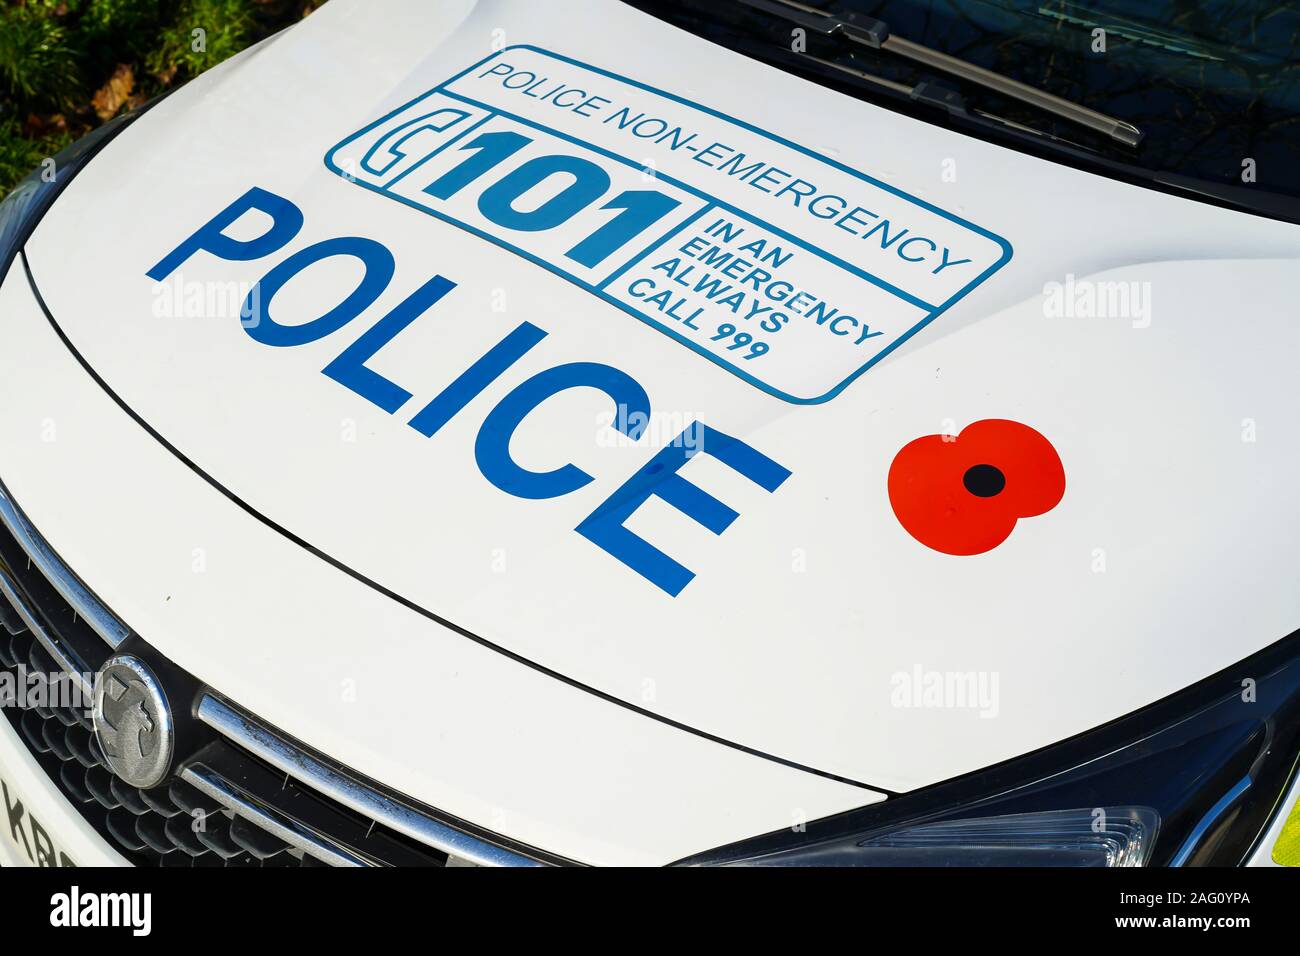 close-up-of-sign-writing-on-police-vehicle-bonnet-advertising-101-telephone-number-for-non-emergency-uk-police-service-2AG0YPA